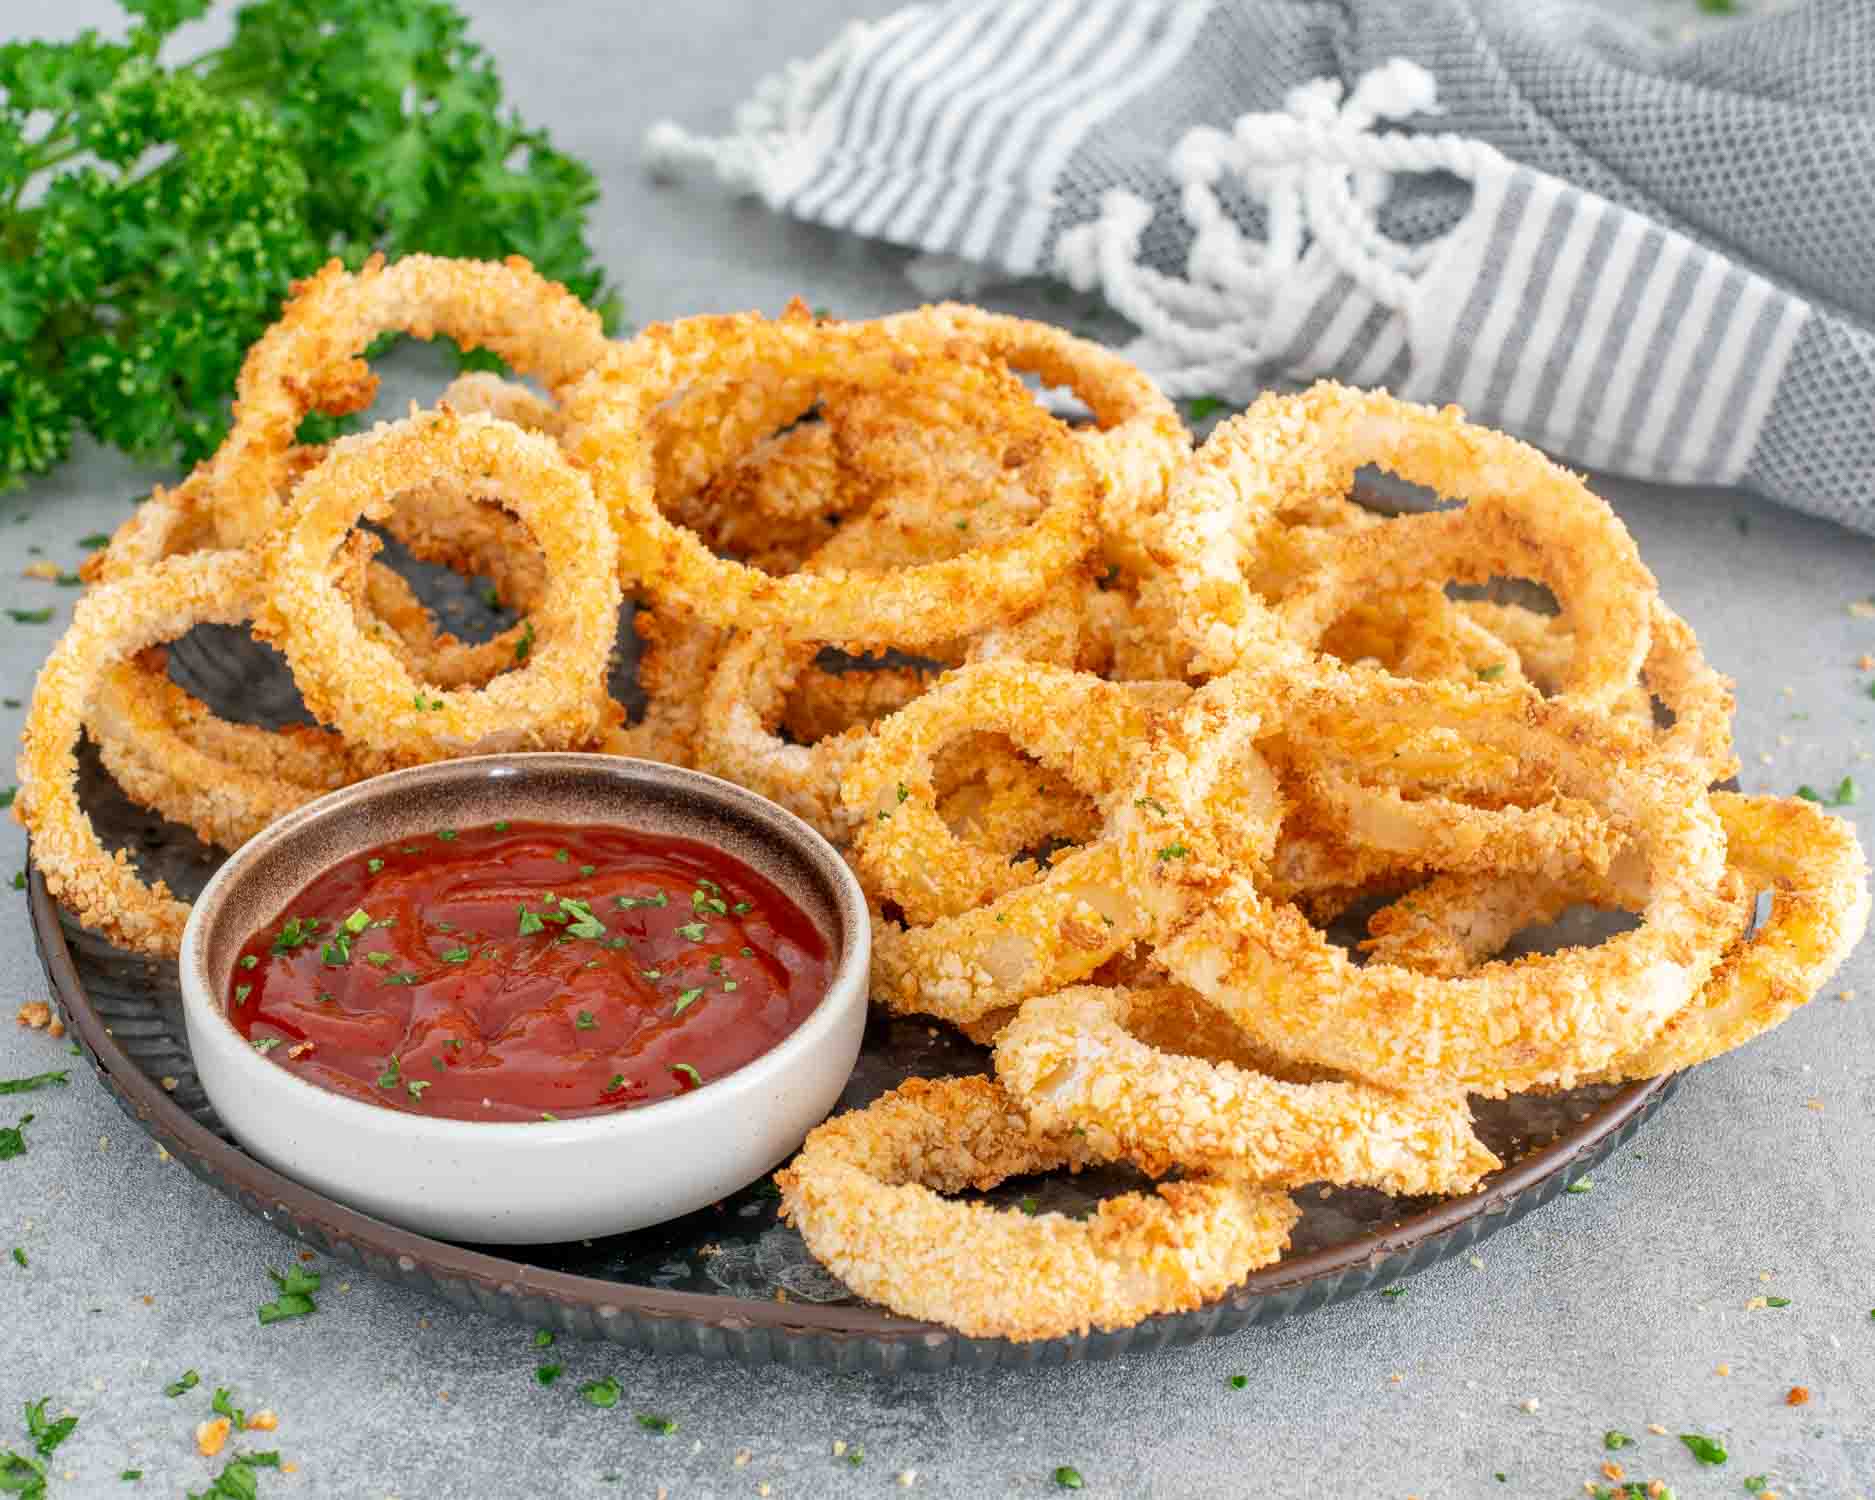 freshly made onion rings in the air fryer on a metal plate with ketchup.